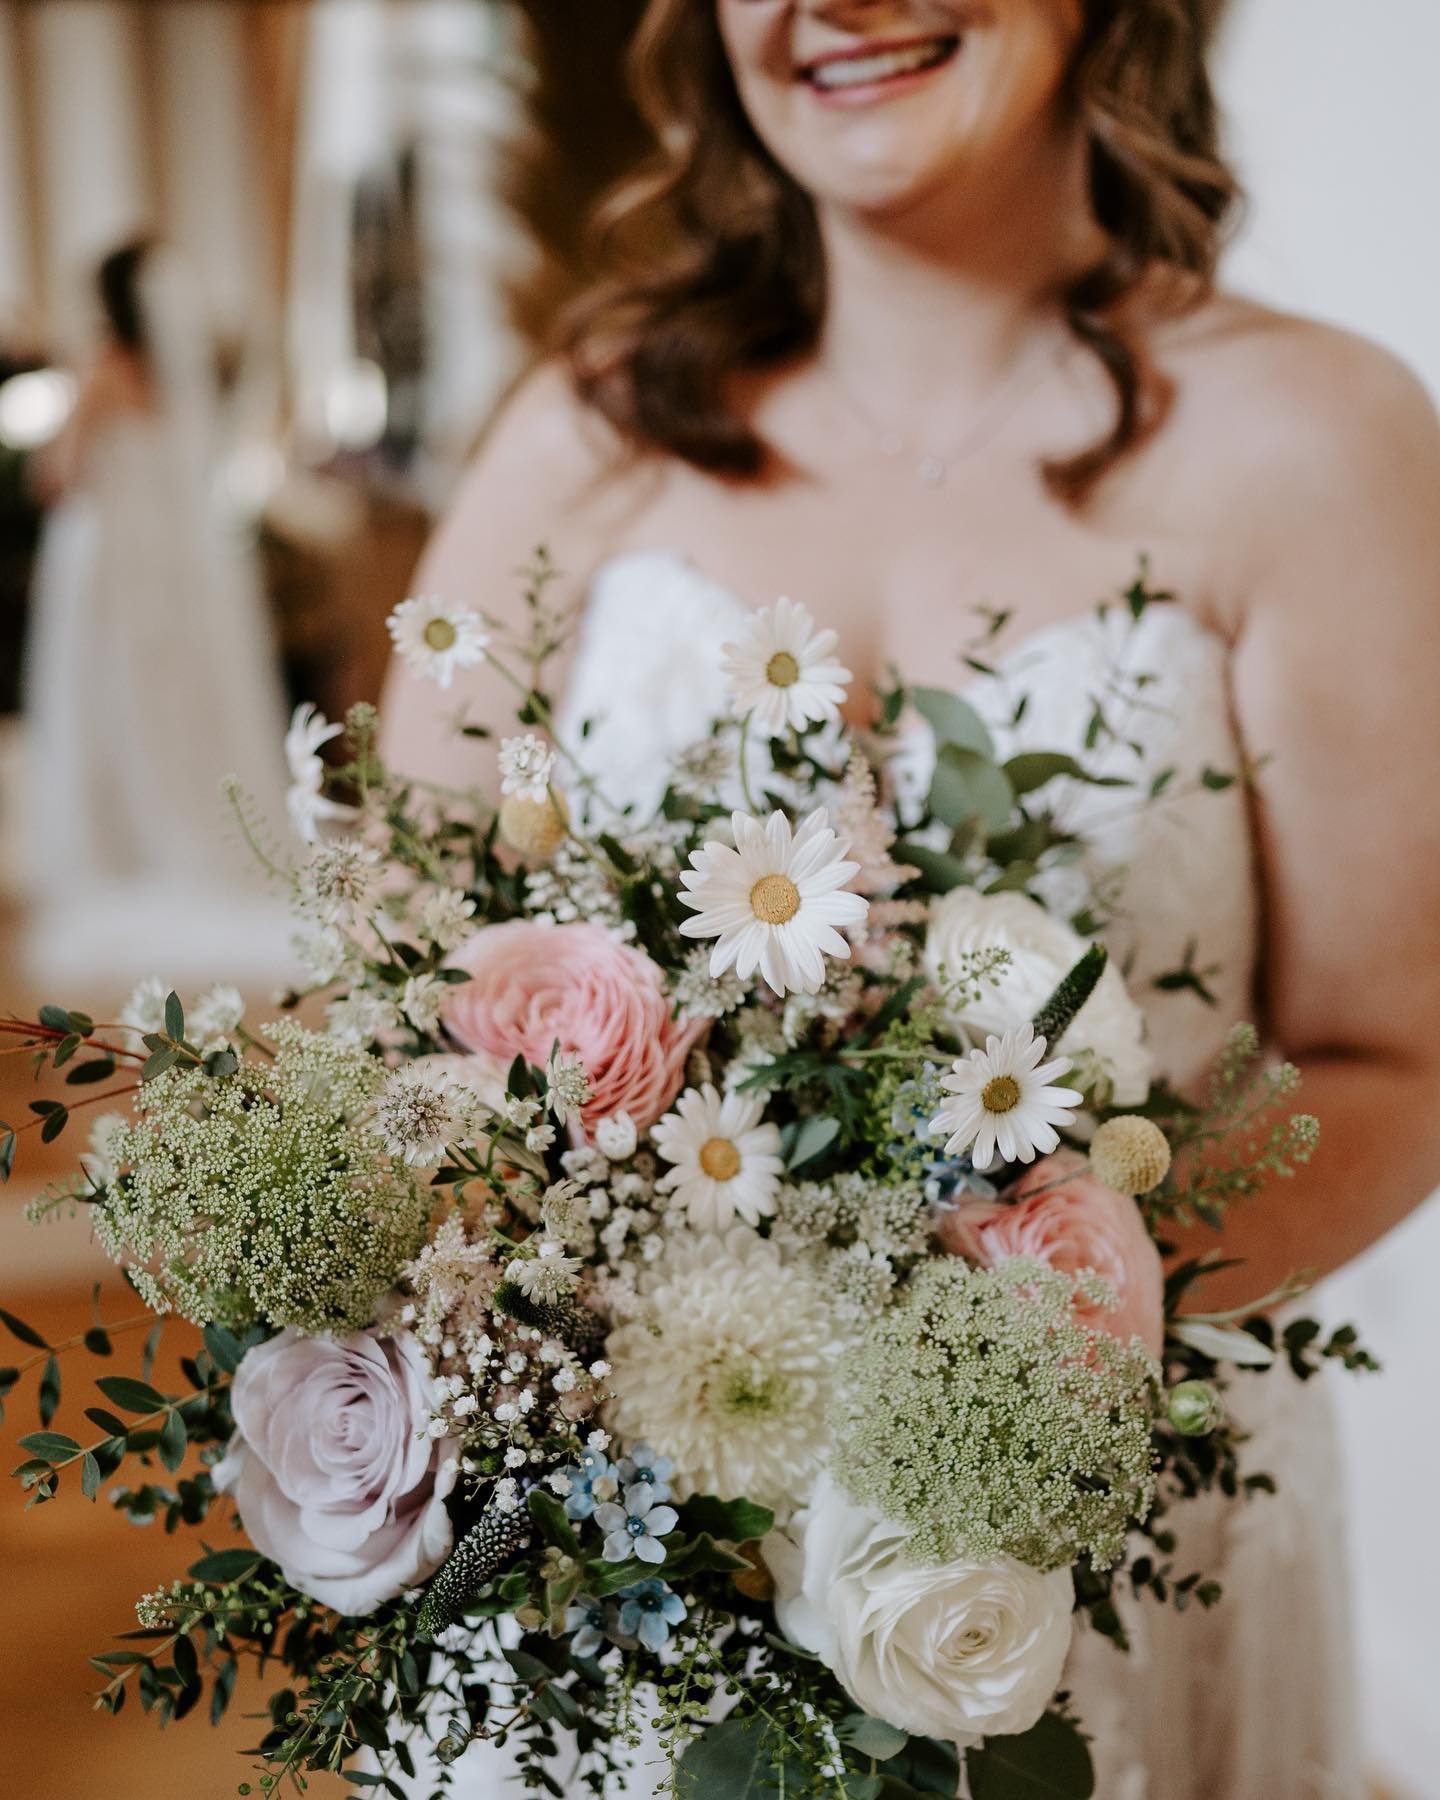 D &amp; L - one year ago today. 💫

With a pretty pastel palette, and flowers that sang the song of Spring. 🌷

We loved this wedding! 💗

📸 @laurawilliamsweddings